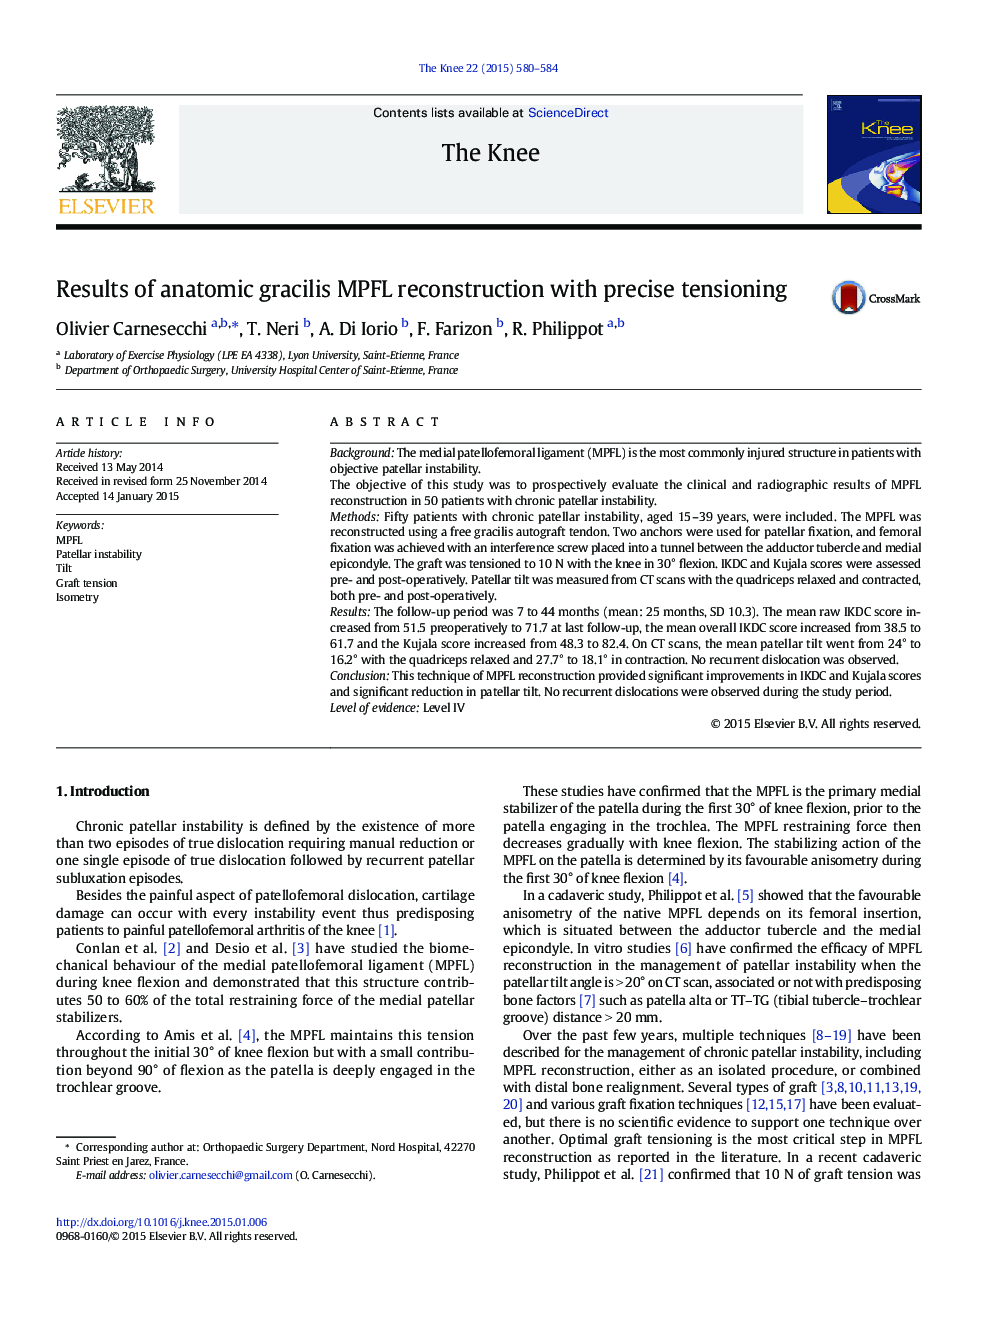 Results of anatomic gracilis MPFL reconstruction with precise tensioning